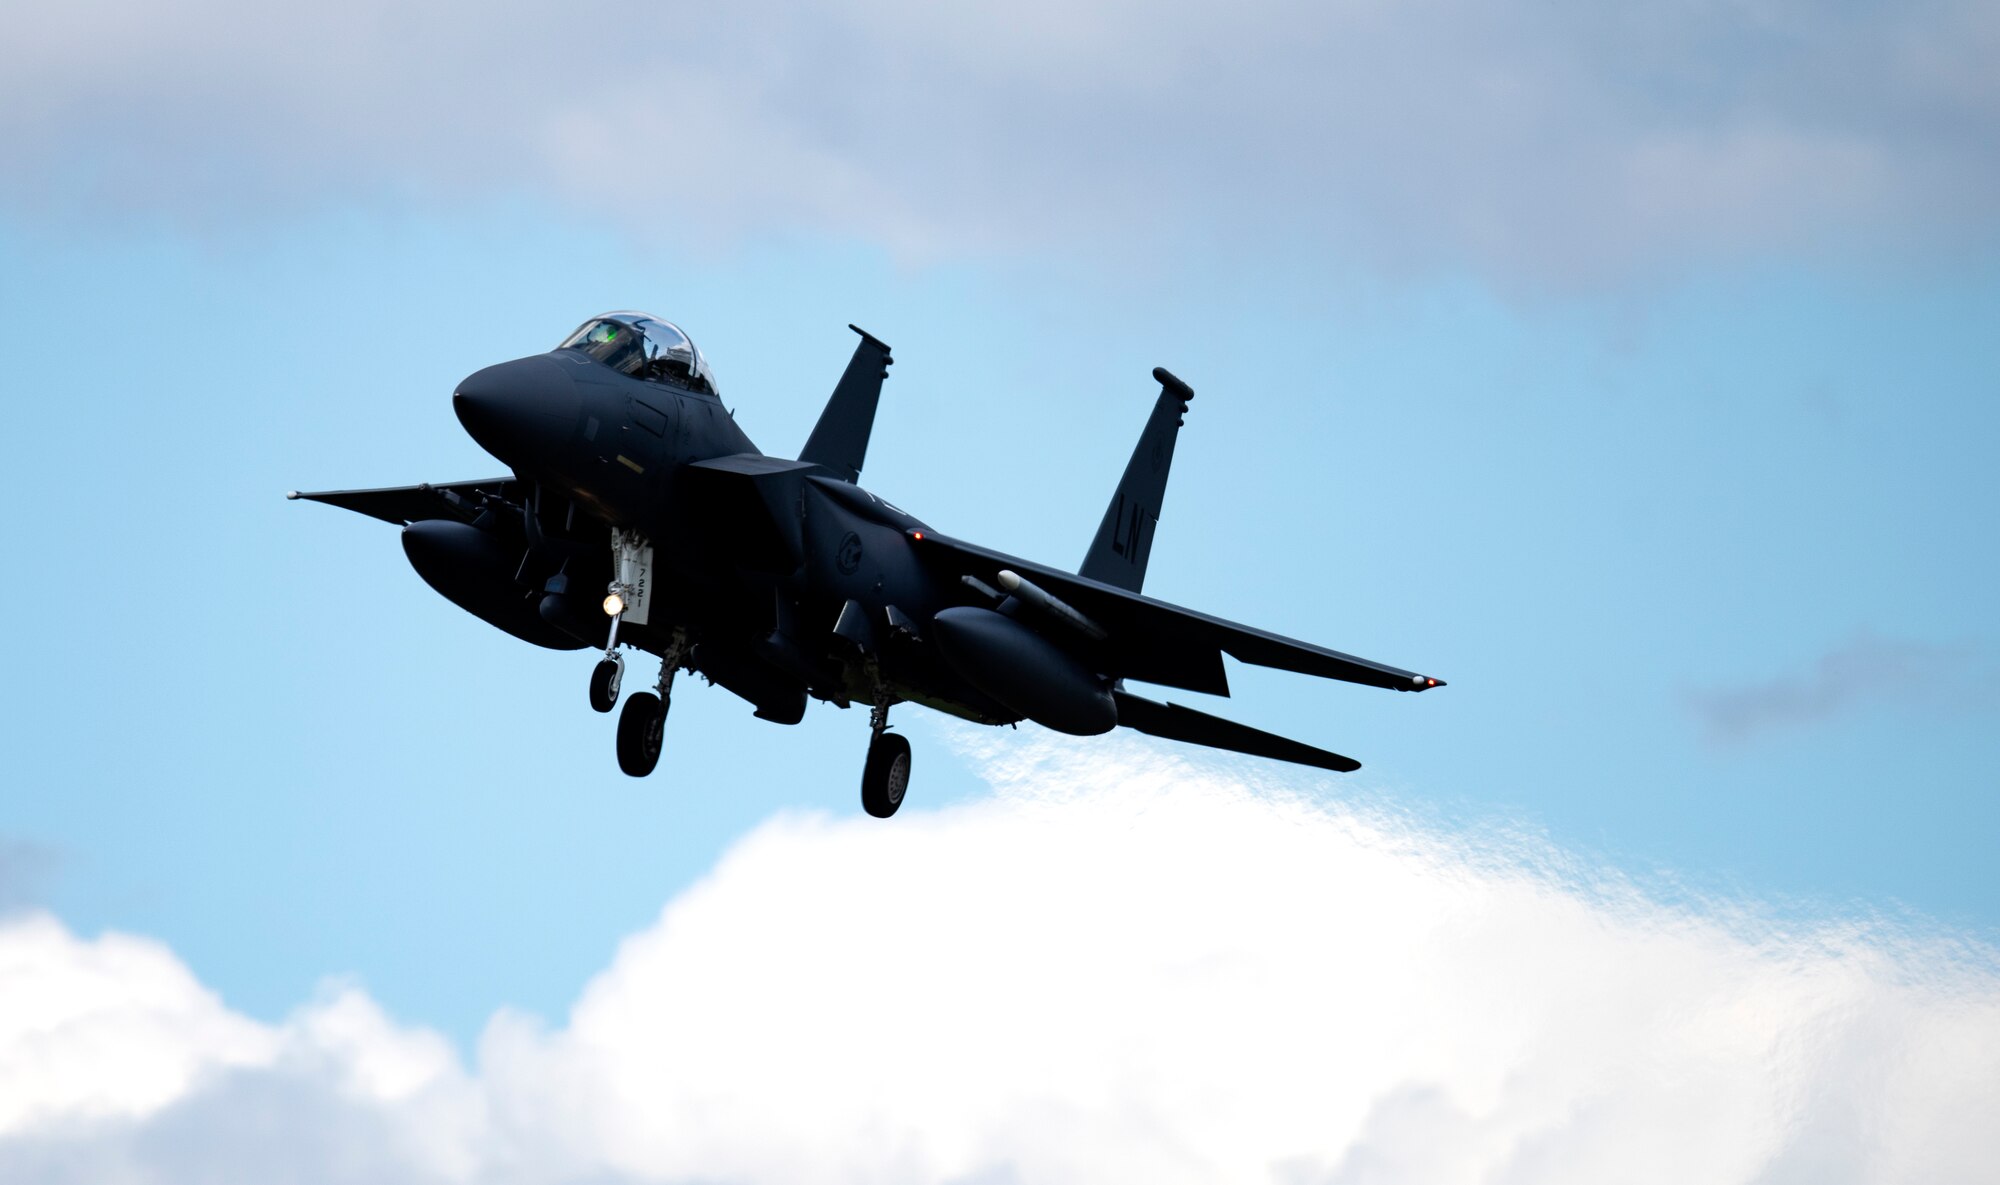 An F-15E Strike Eagle assigned to the 48th Fighter Wing prepares to touch down at Royal Air Force Lakenheath, England, July 20, 2020. The Liberty Wing conducts routine training in order to maintain combat readiness and safeguard U.S. national interests and the collective defense of allies and partners. (U.S. Air Force photo by Airman 1st Class Jessi Monte)